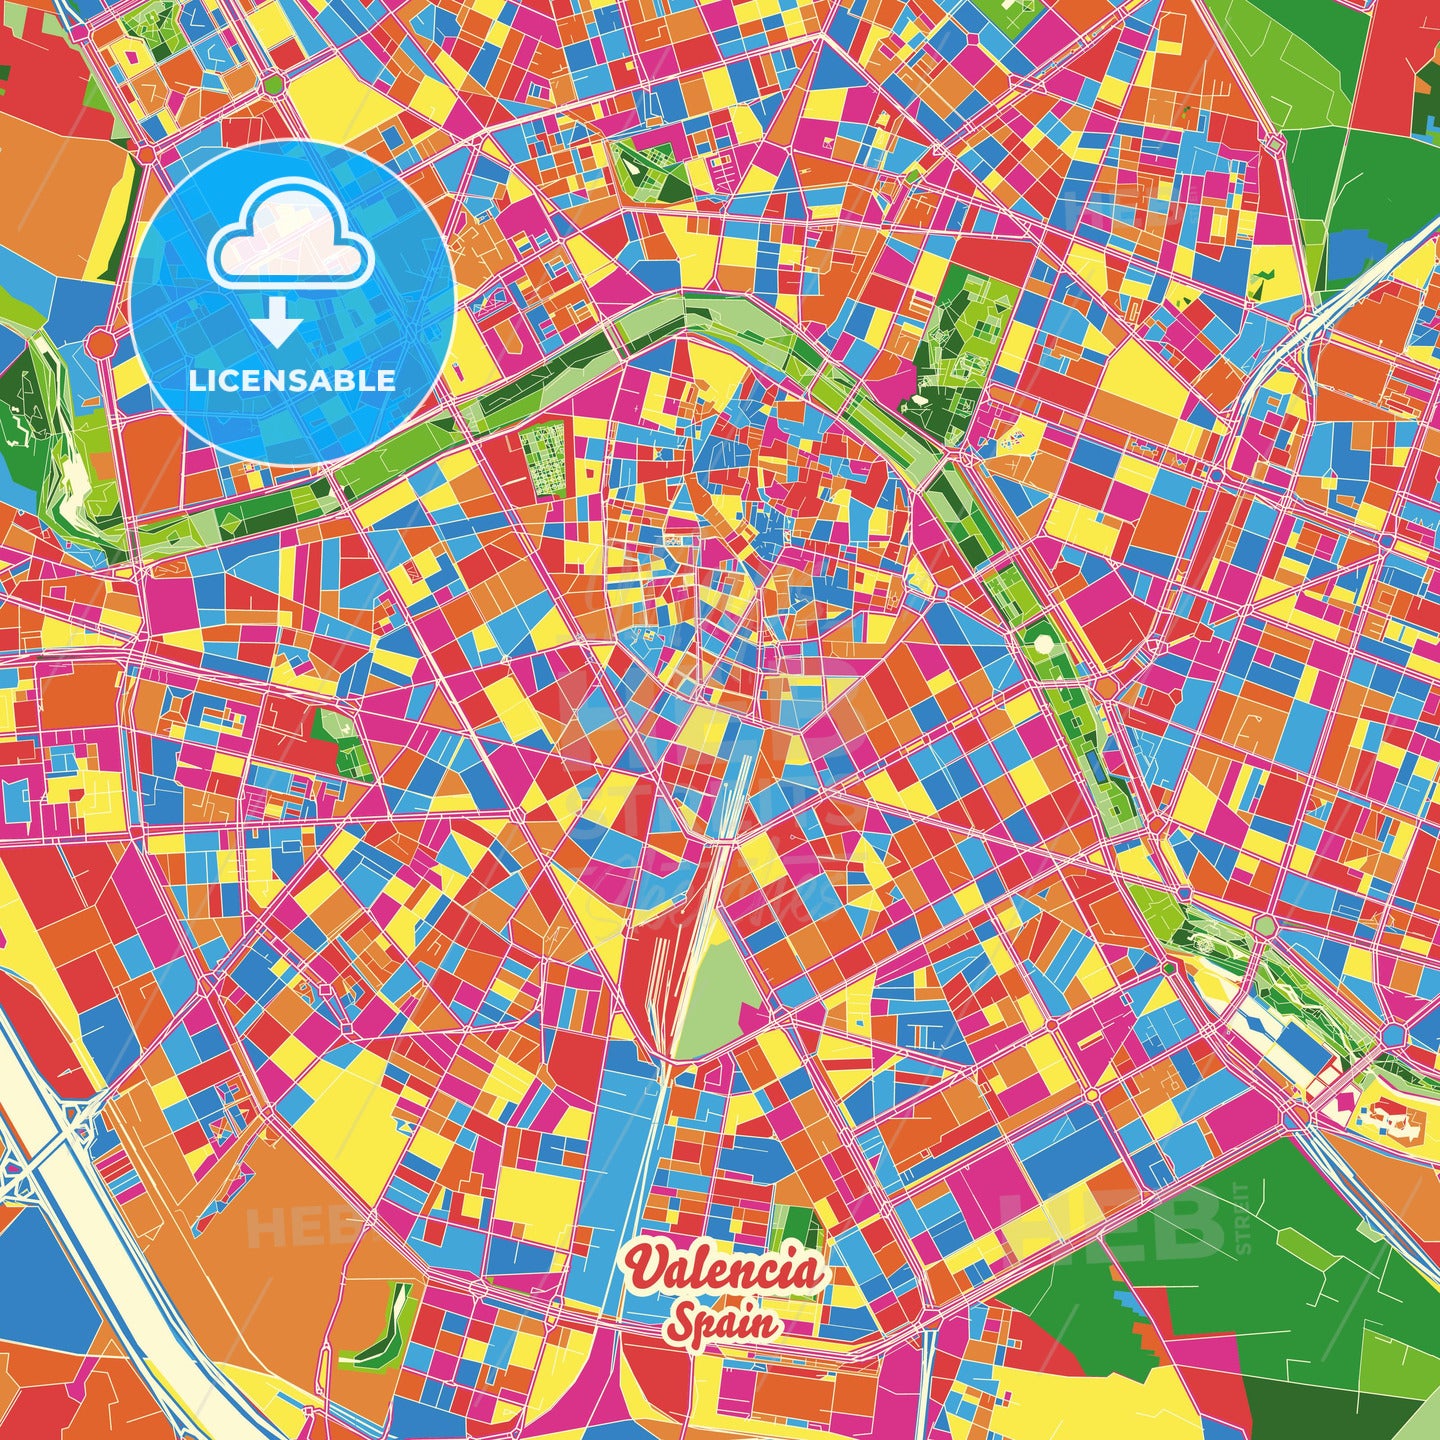 Valencia, Spain Crazy Colorful Street Map Poster Template - HEBSTREITS Sketches